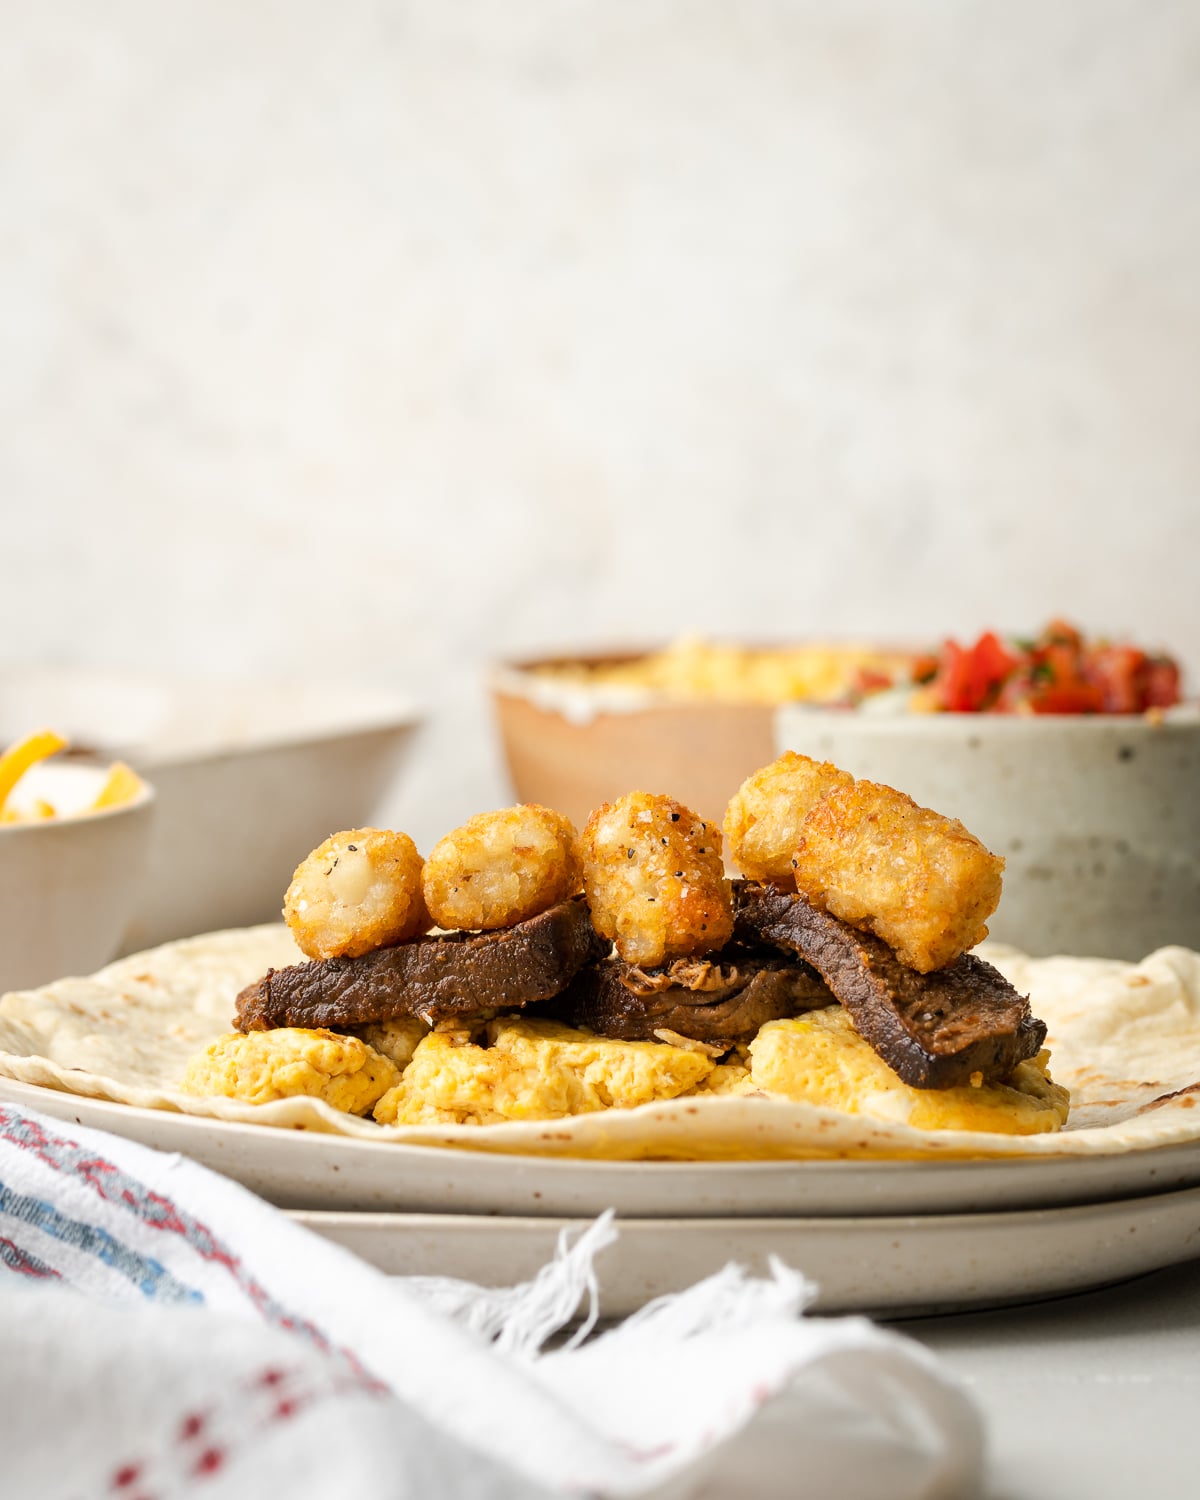 tater tots on top of steak and eggs on a flour tortilla